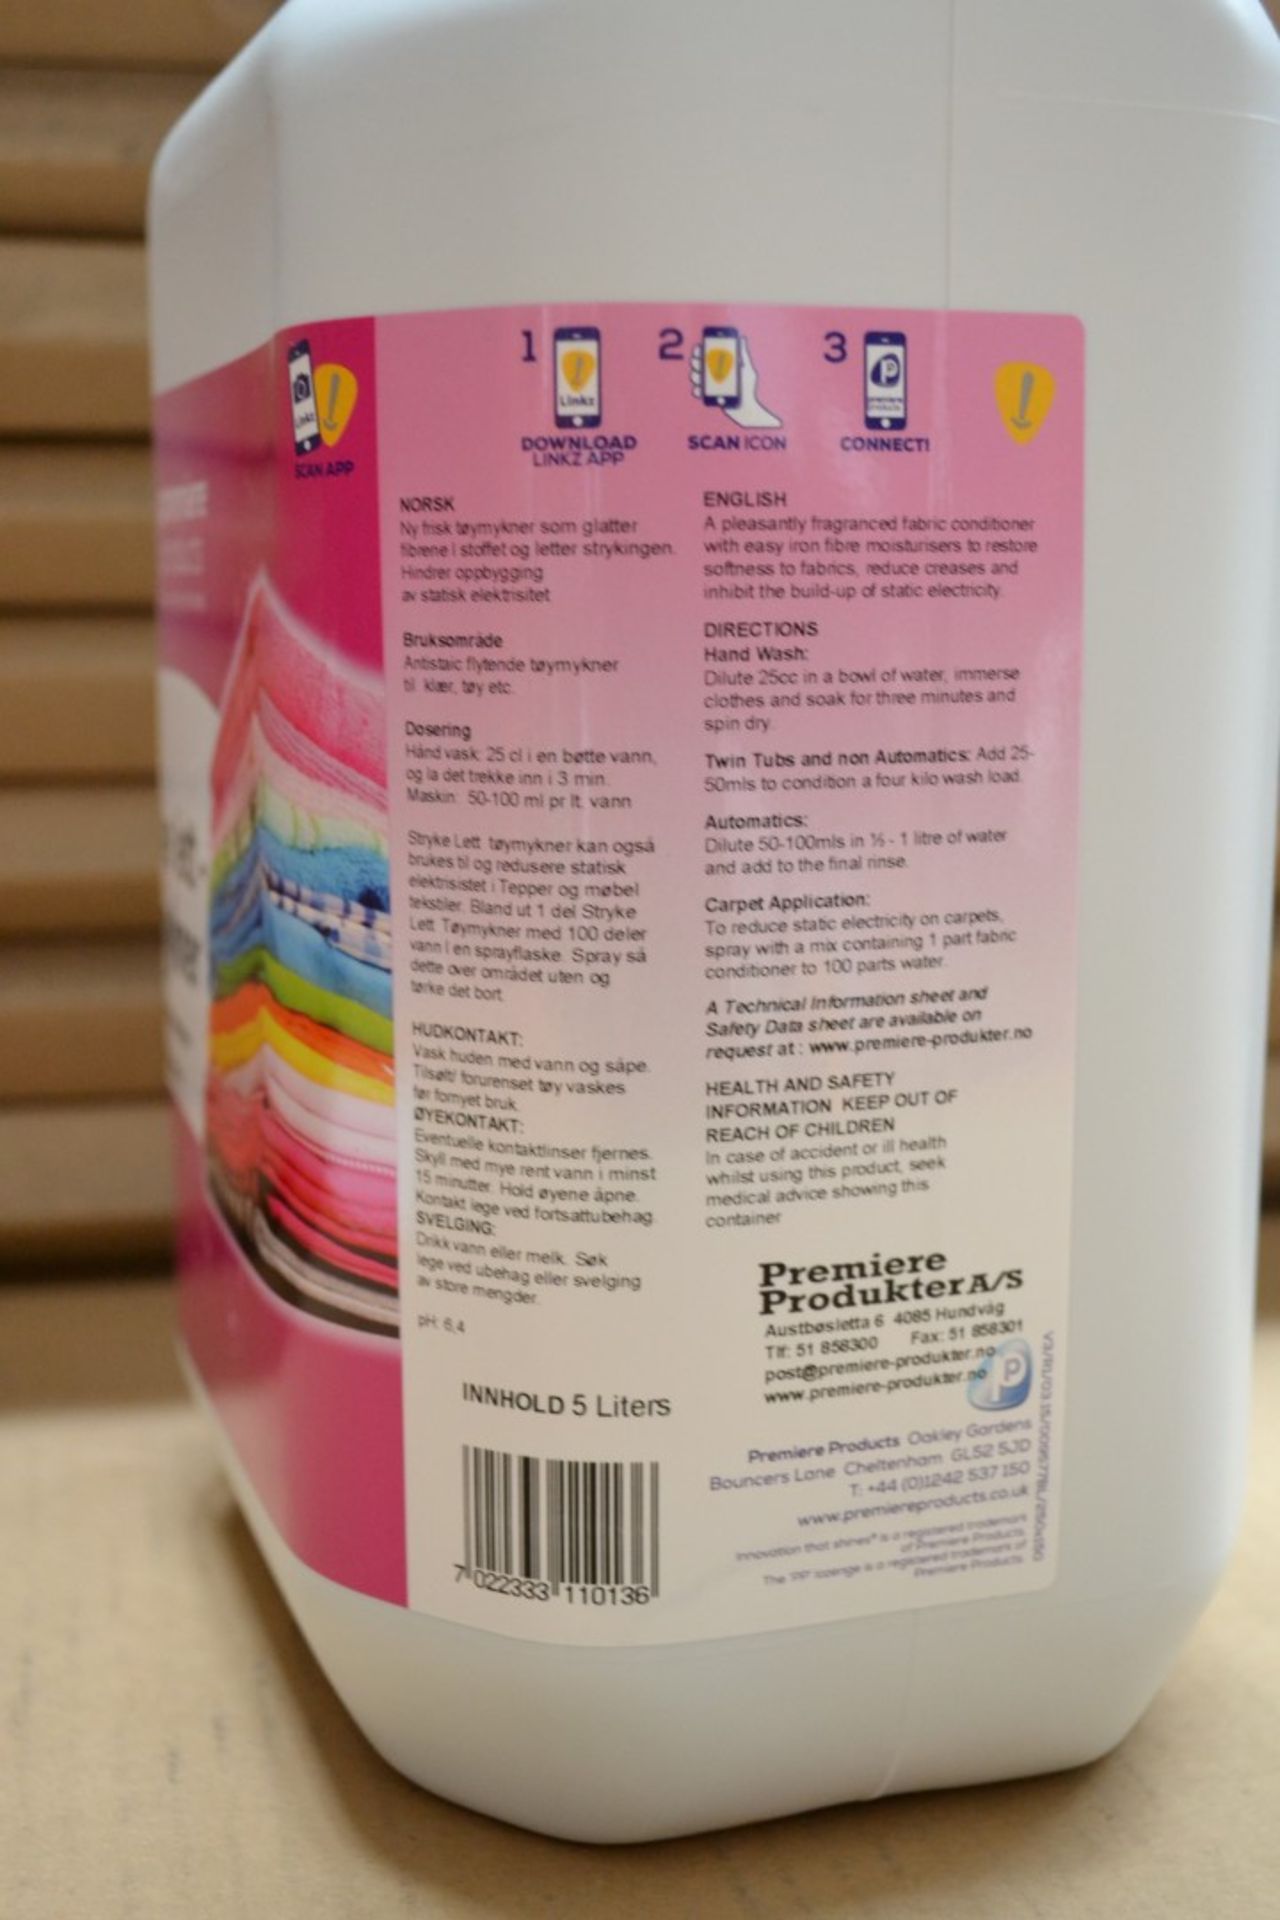 2 x 5ltr Premiere Products Easy Iron fabric conditioner - New Boxed Stock - CL083 - Ref 08062 - - Image 4 of 6